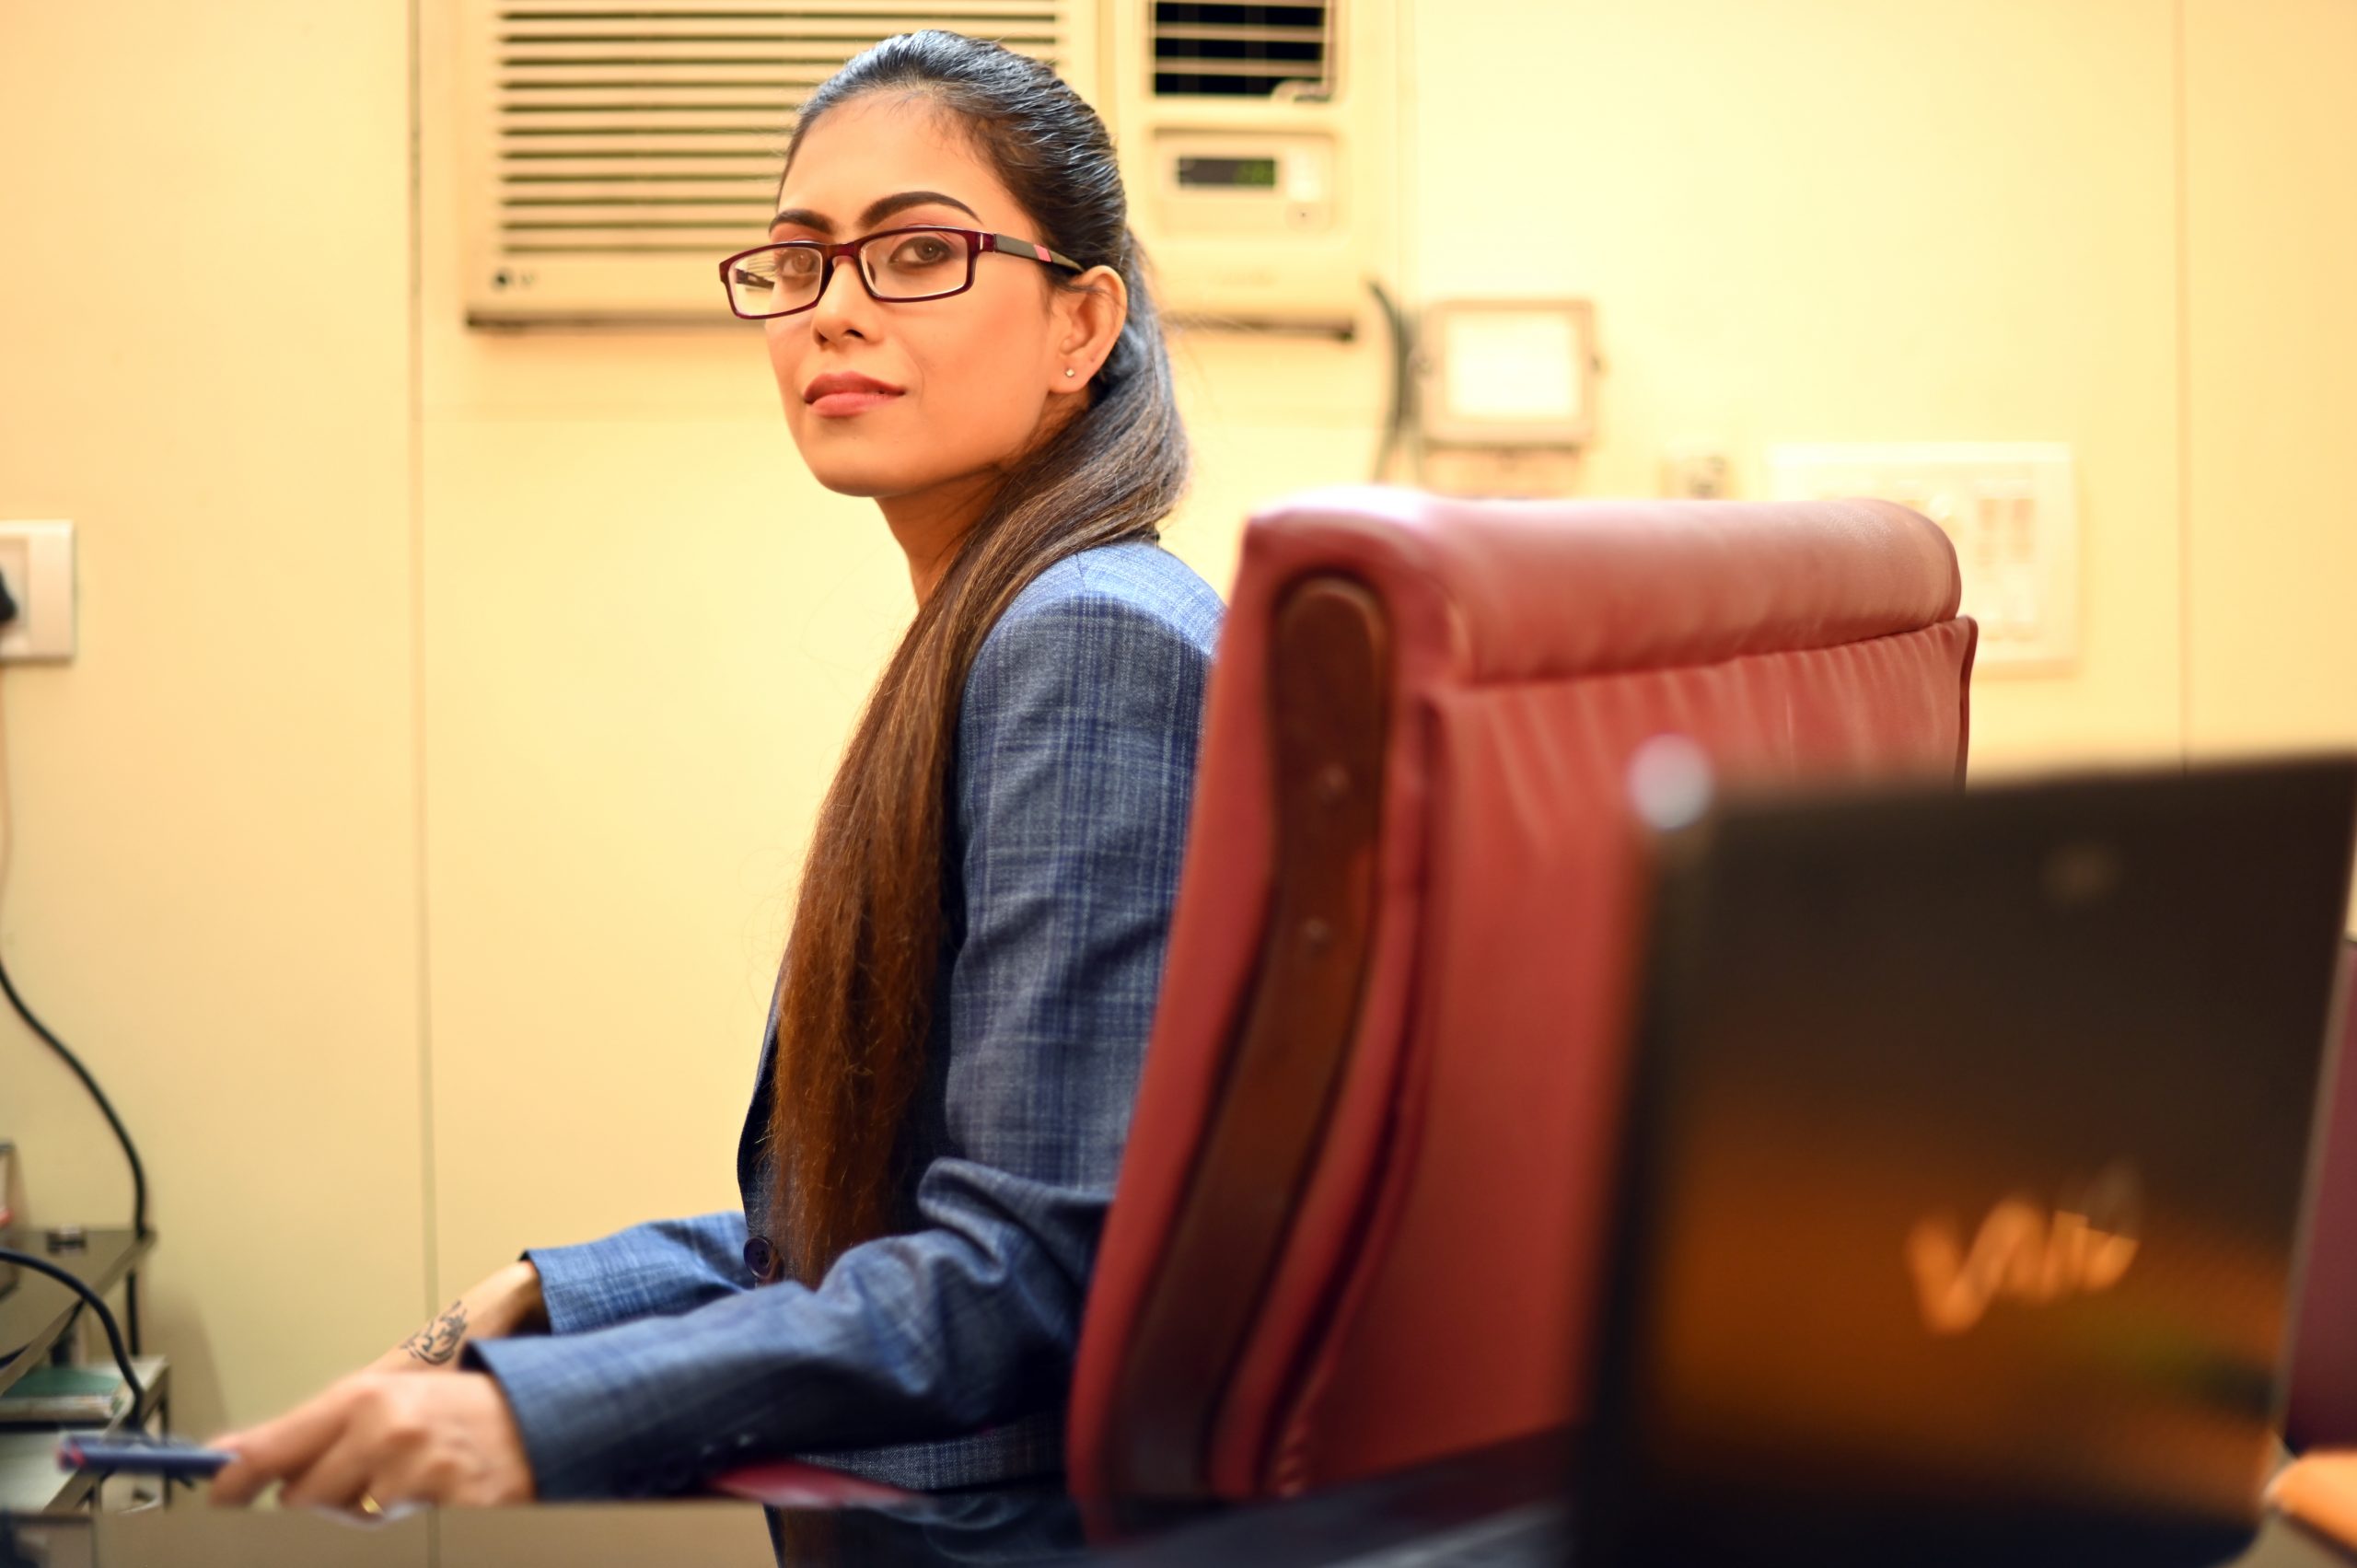 Women sitting on a chair in office